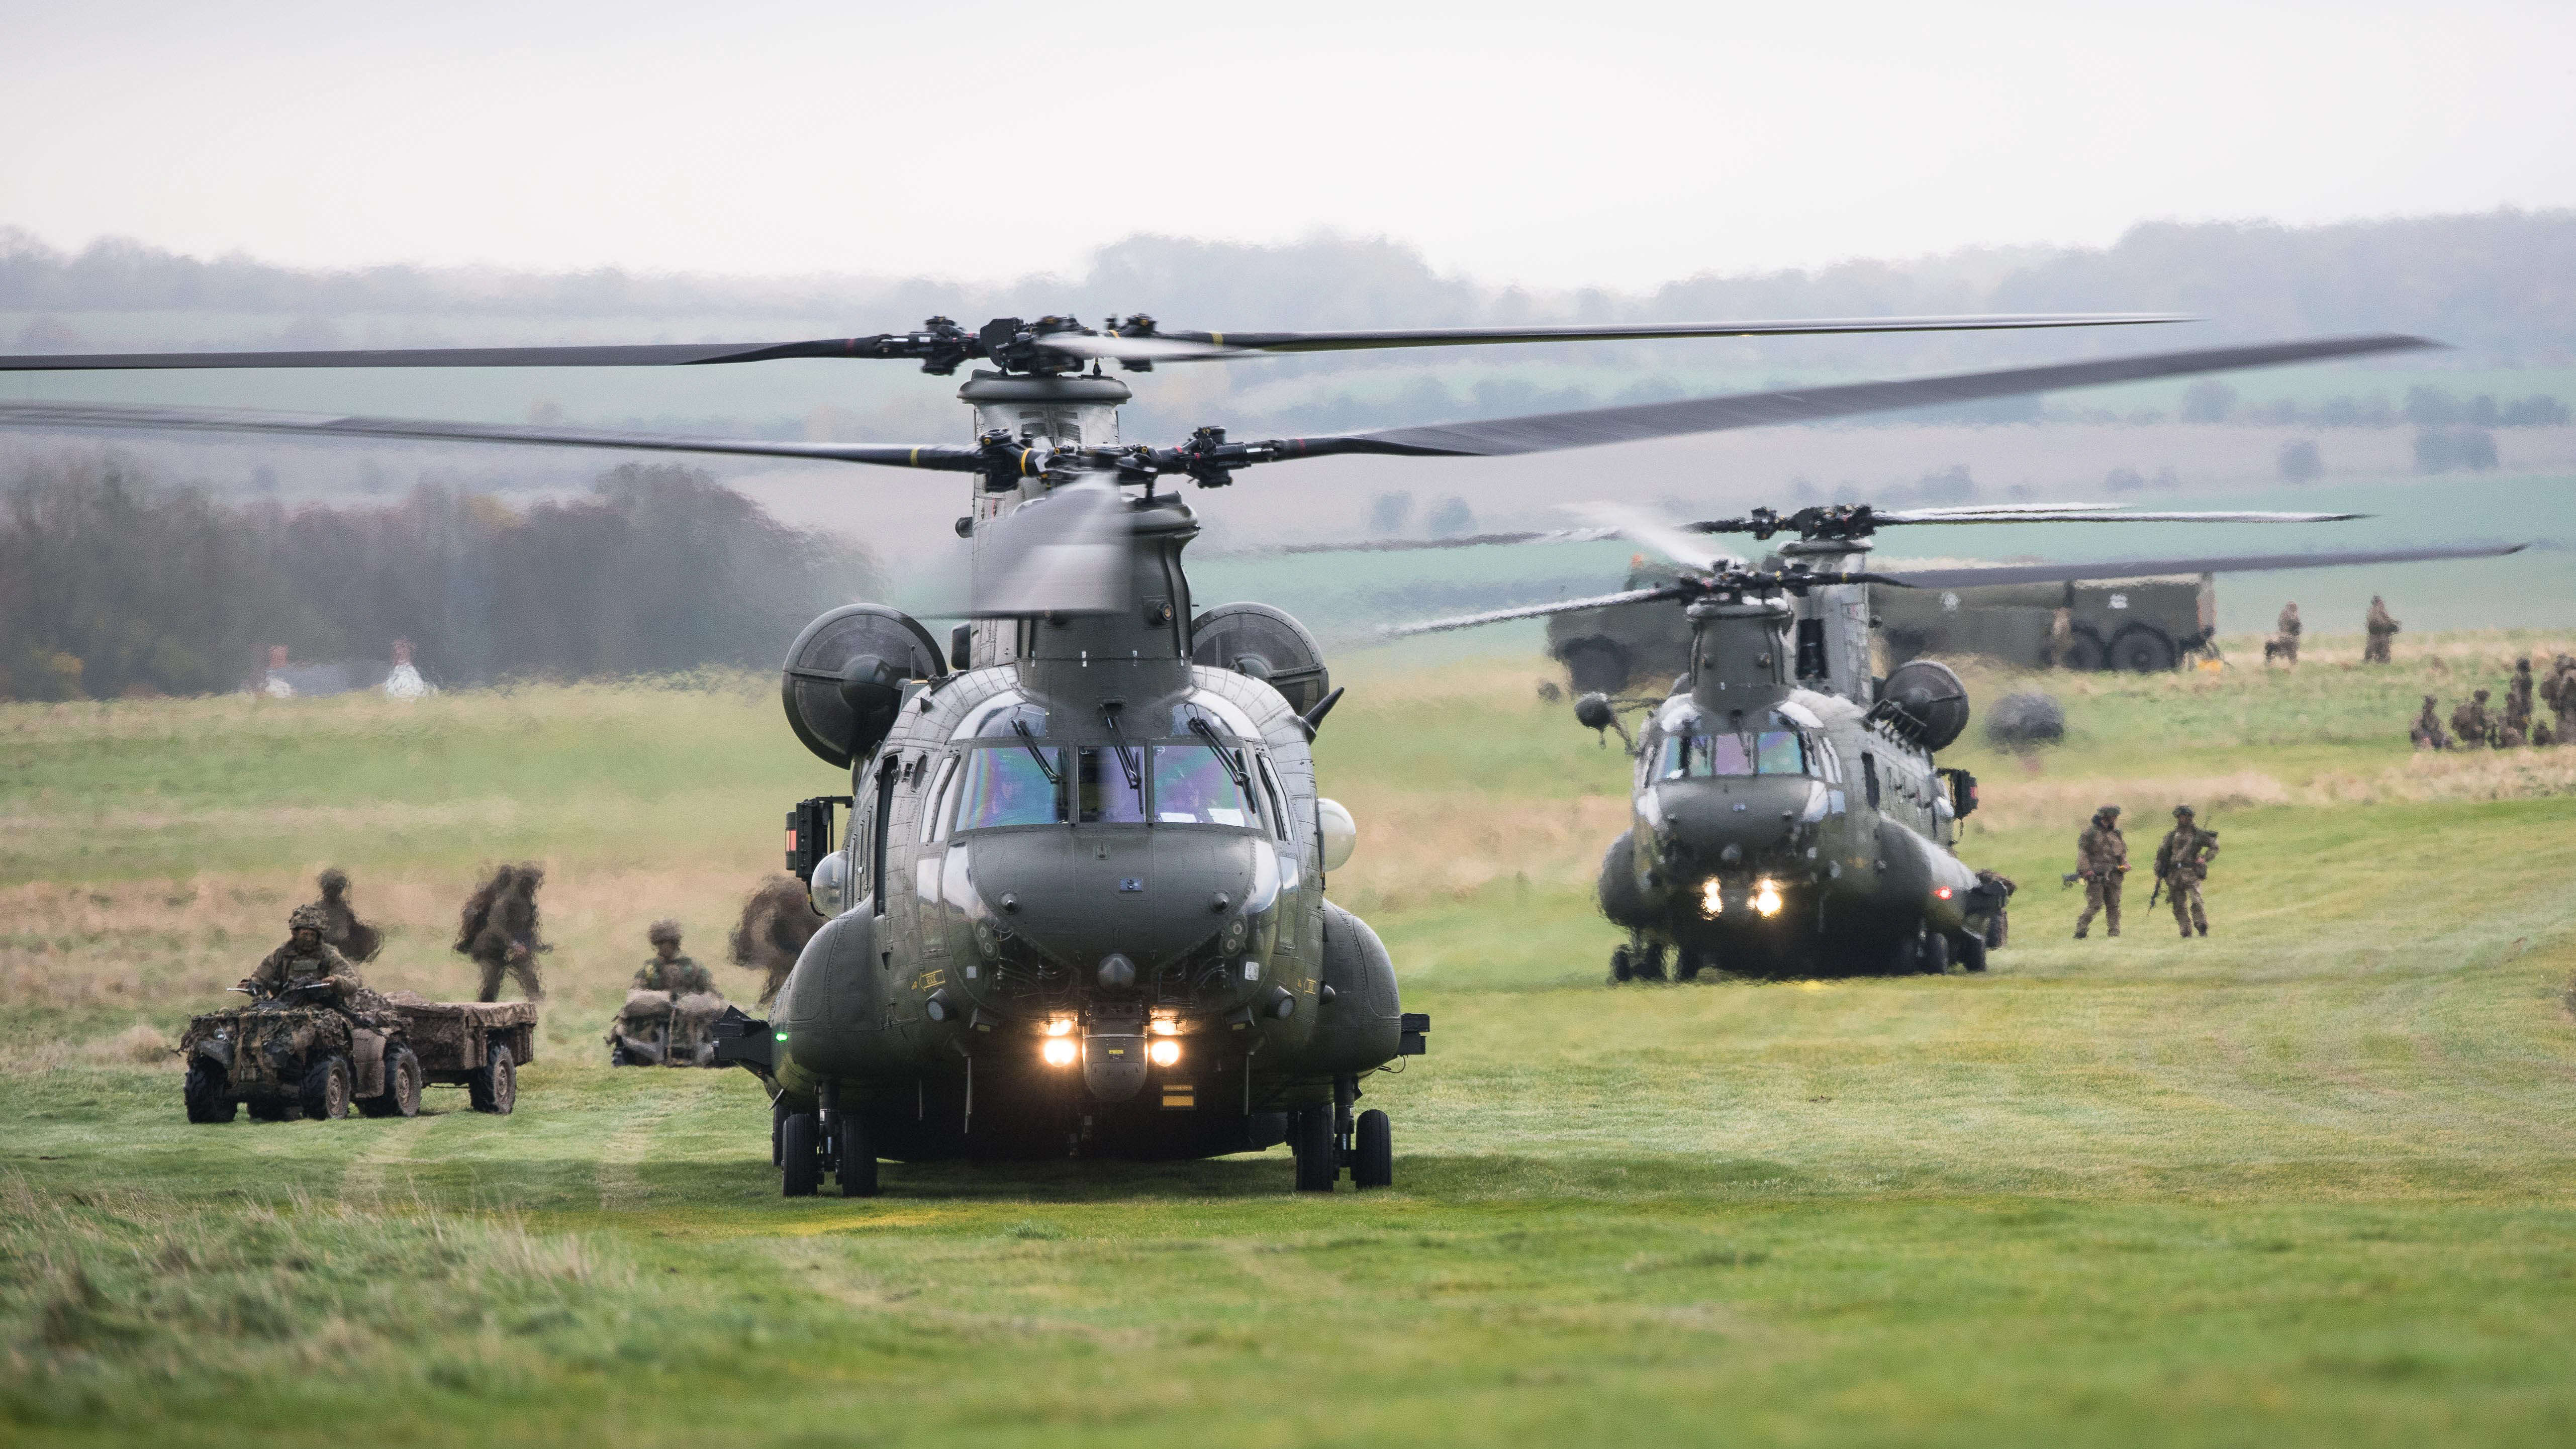 Chinook helicopters are loaded during a military exercise on field